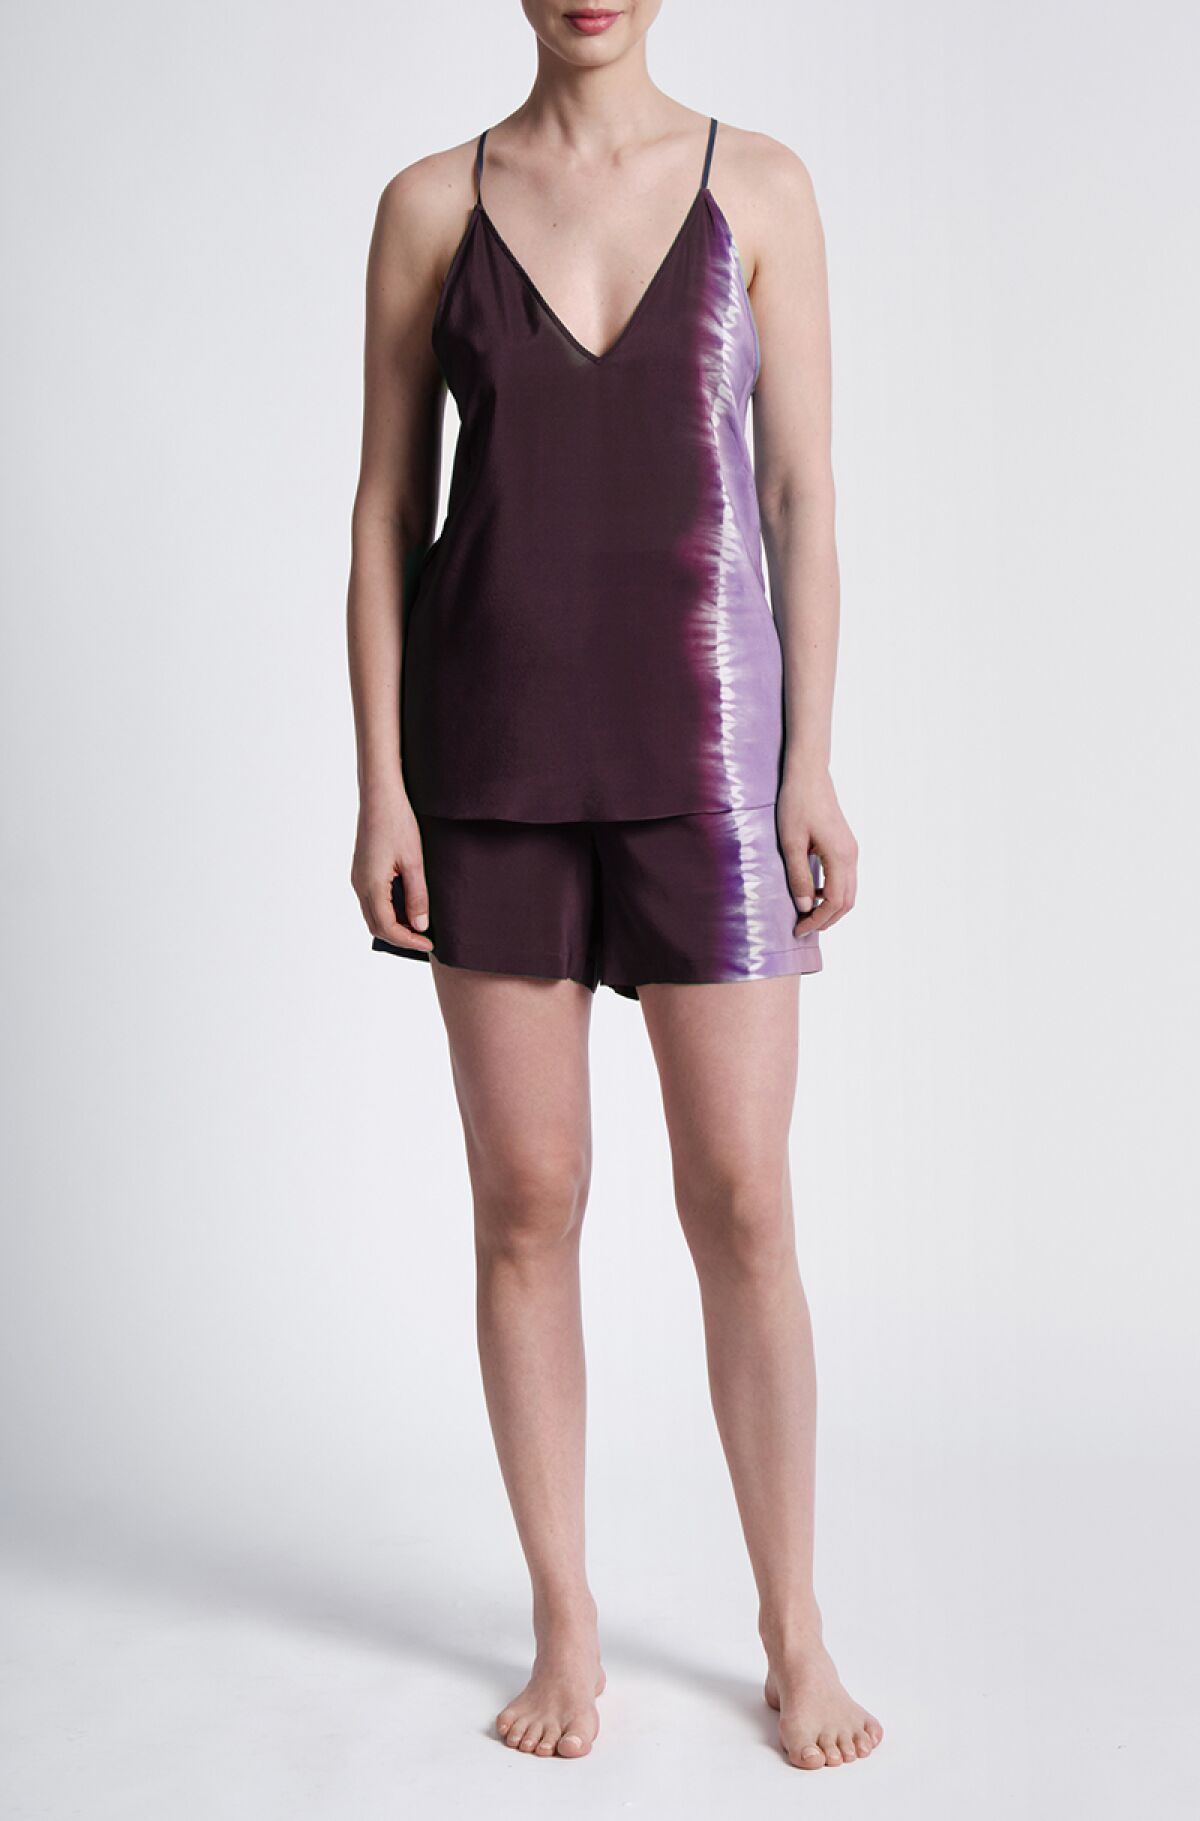 A photo of Altuzarra's lightweight pajama top and shorts.